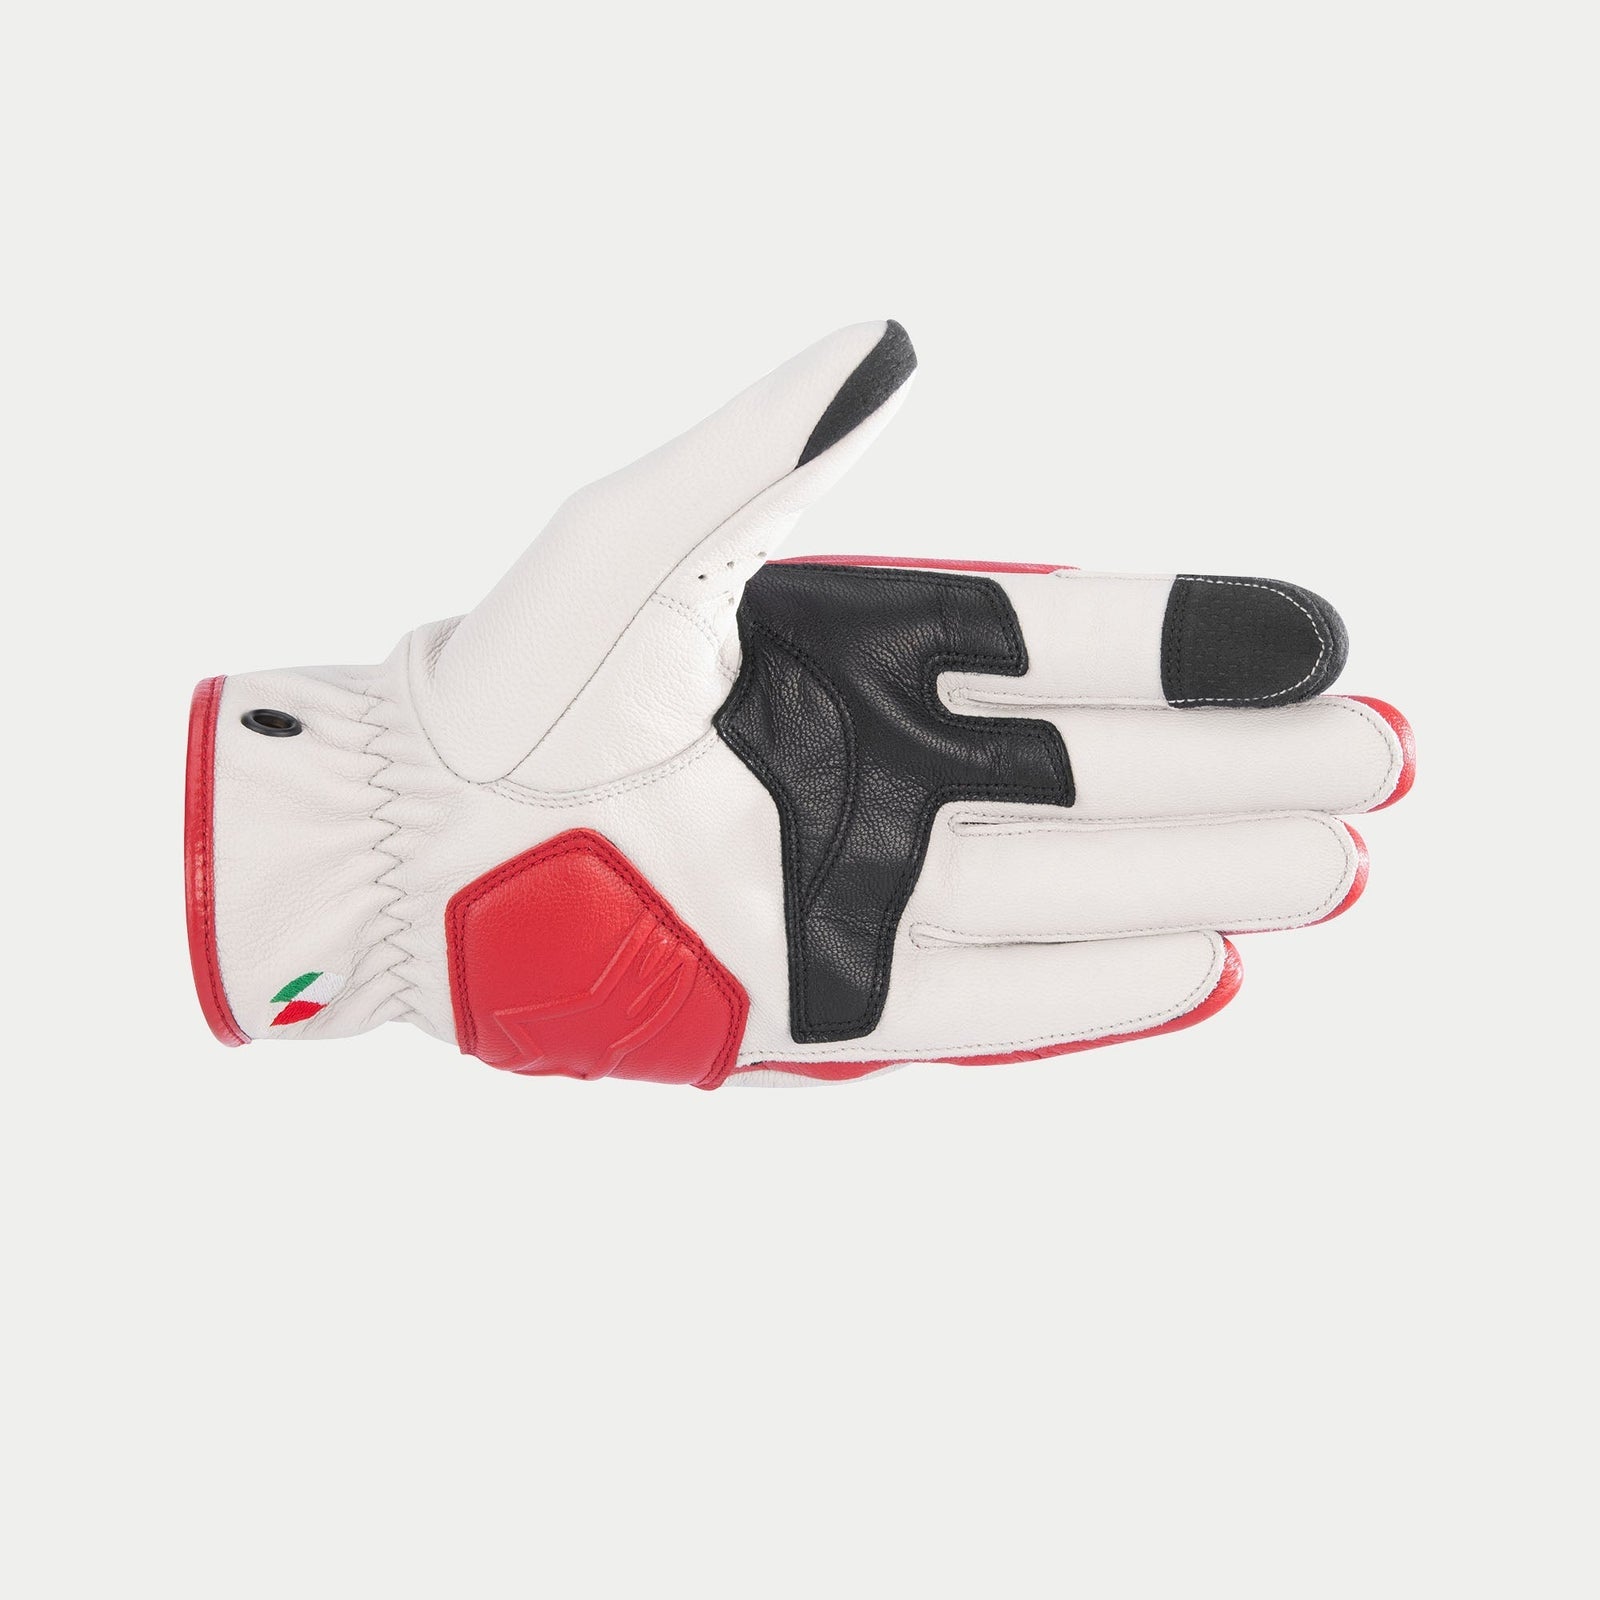 Dyno Leather Gloves